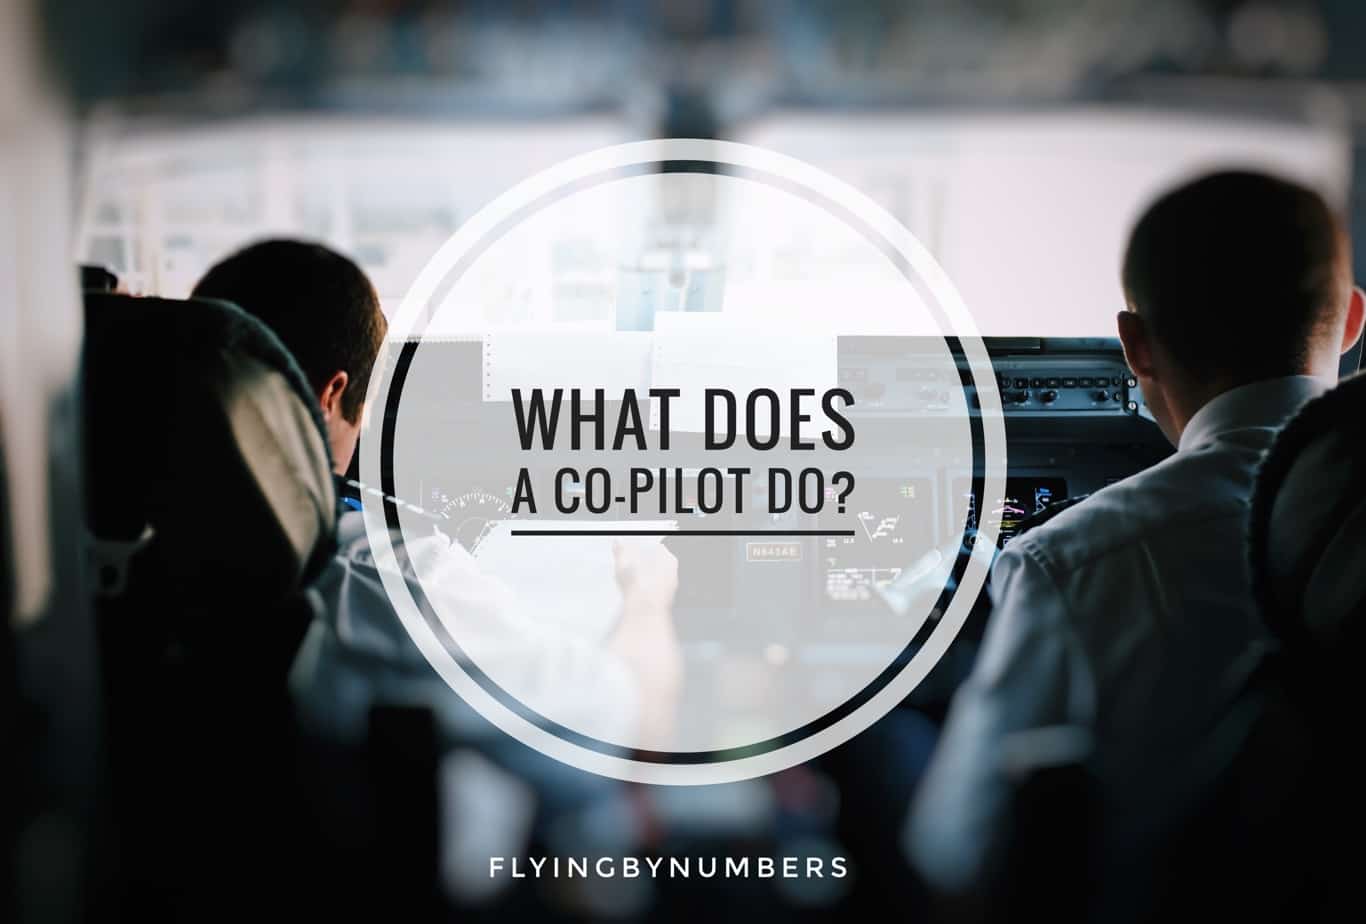 What is a co-pilot and what do co-pilots actually do in the cockpit?